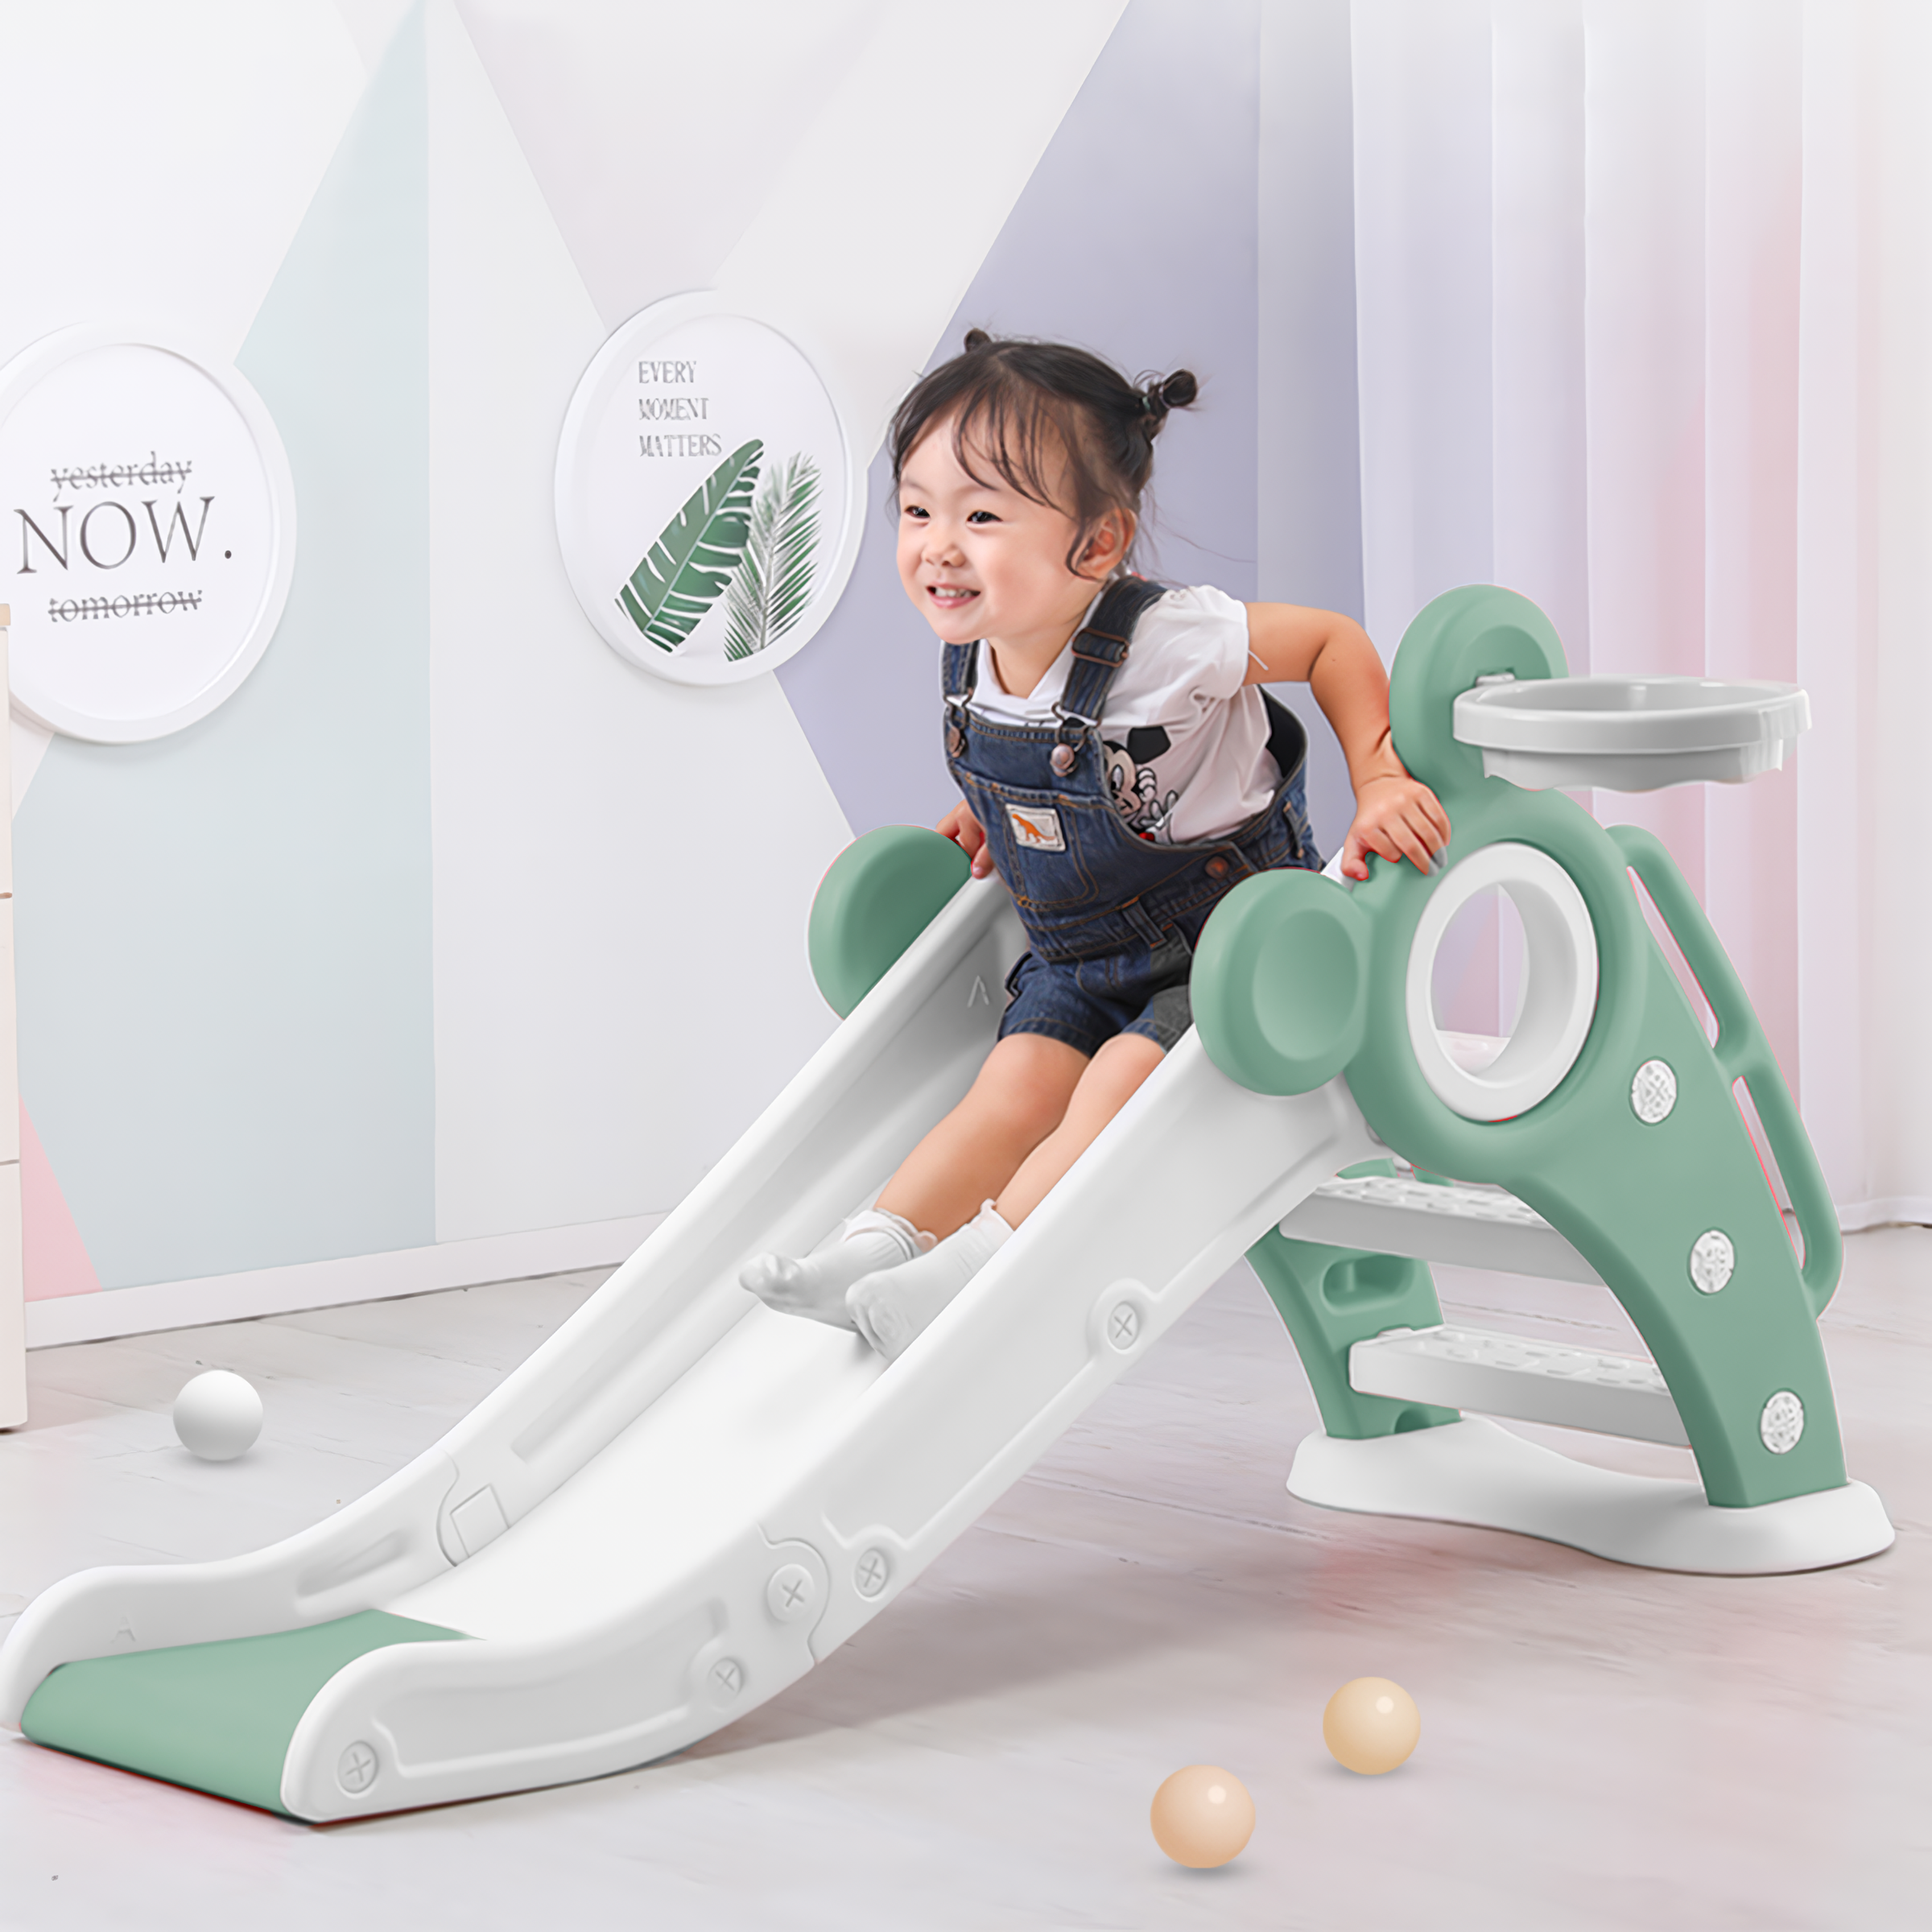 Children's folding slide with stairs, outdoor small children's slide toys multifunctional toys, folding slide, suitable for young children a slide toys